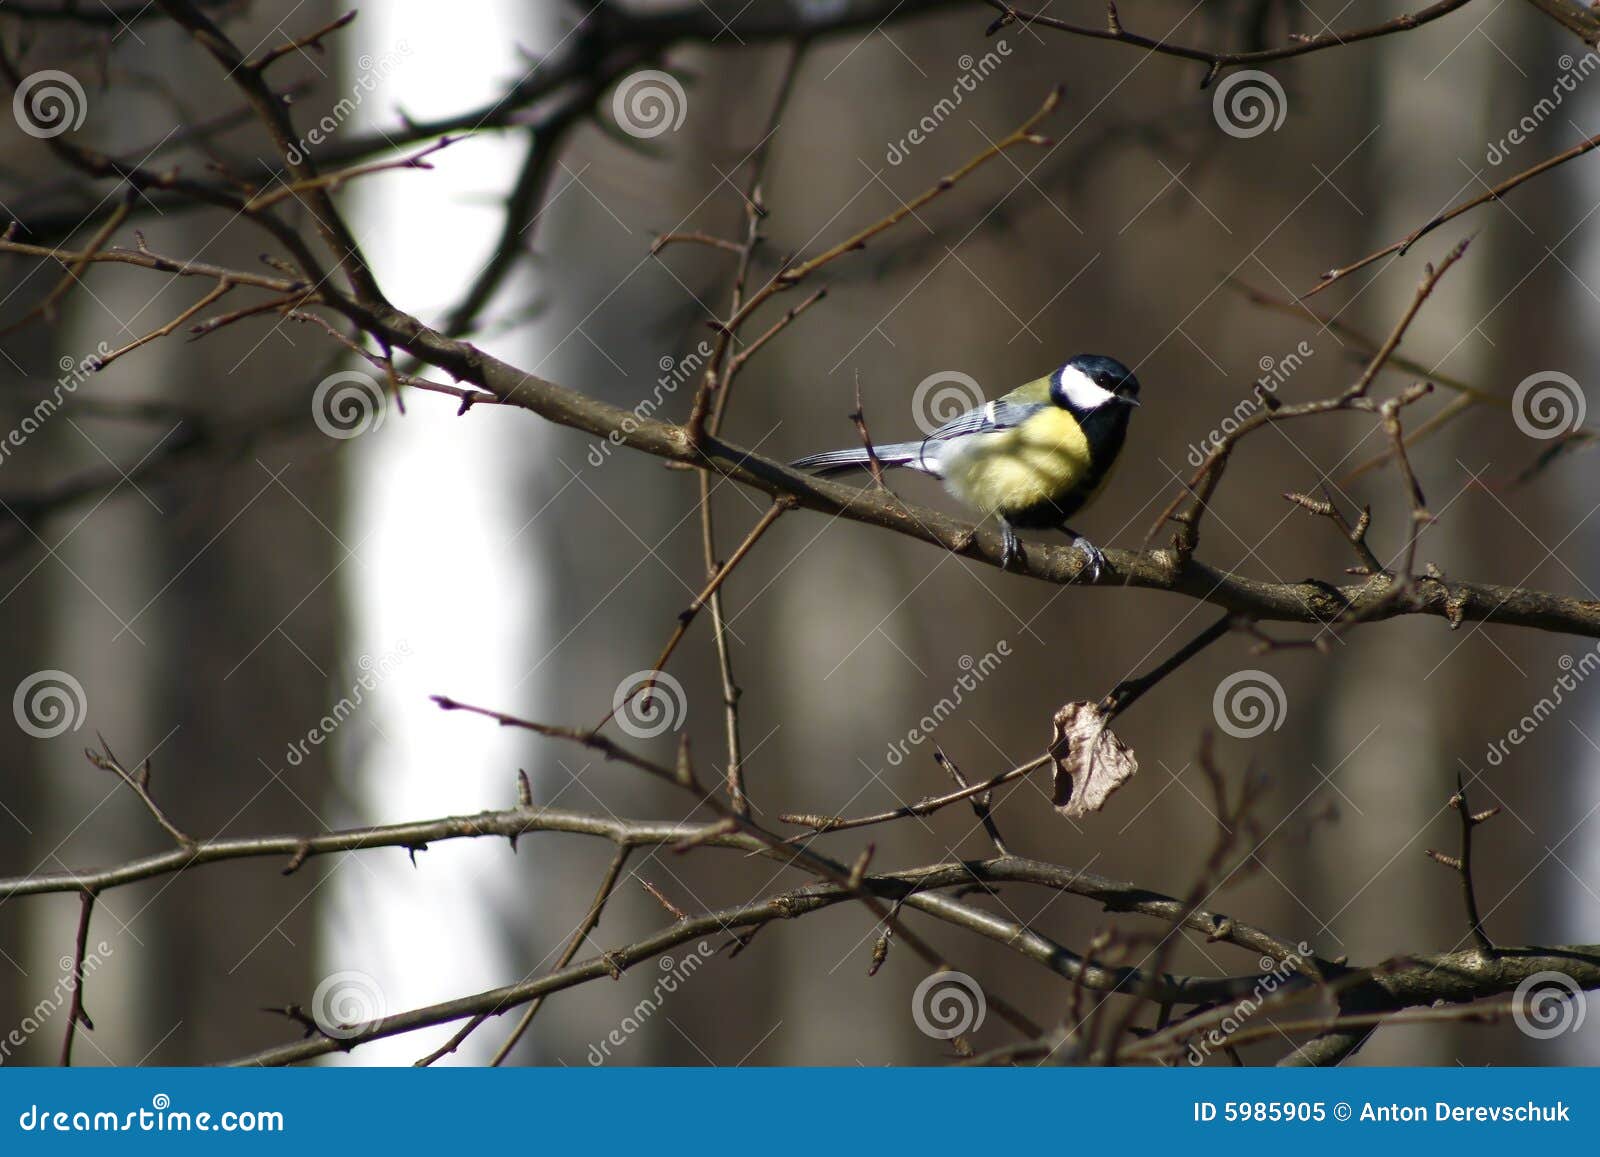 tomtit on a branch